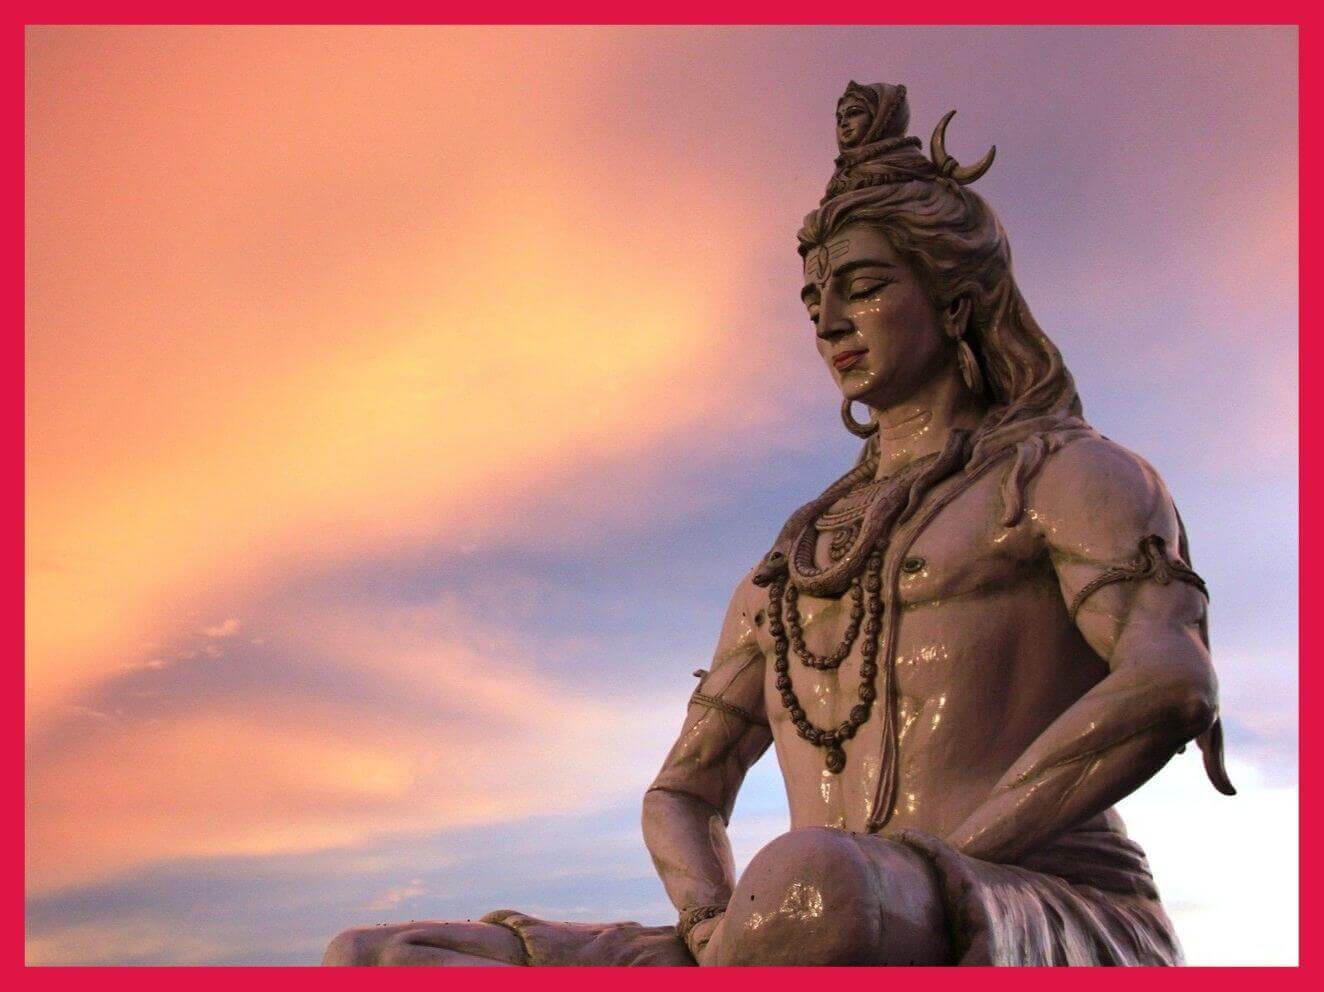 hd images of lord shiva free download